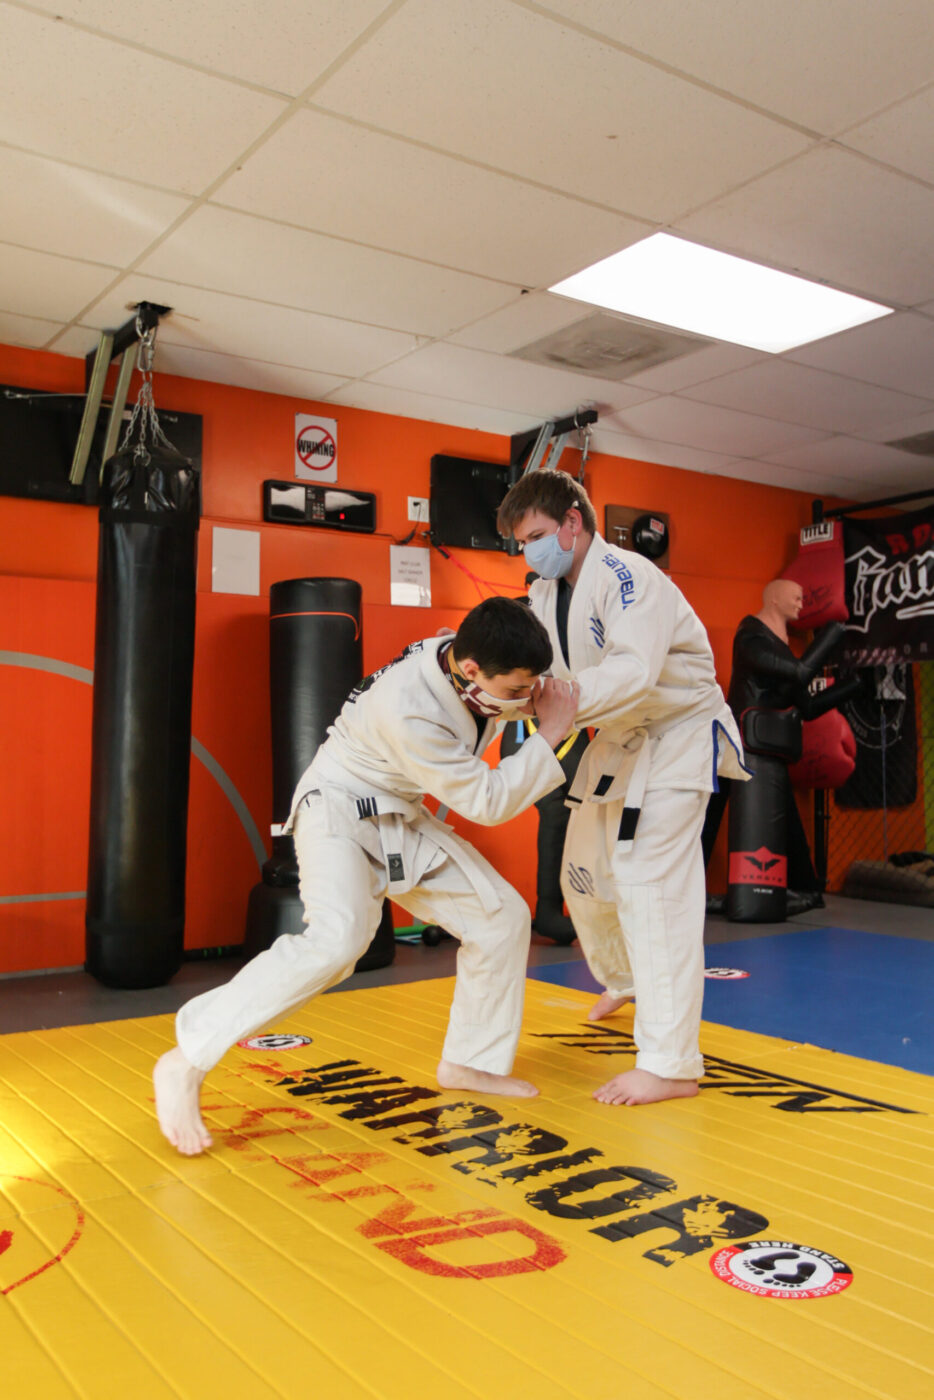 Local gym takes stance on bullying, benefits of martial arts